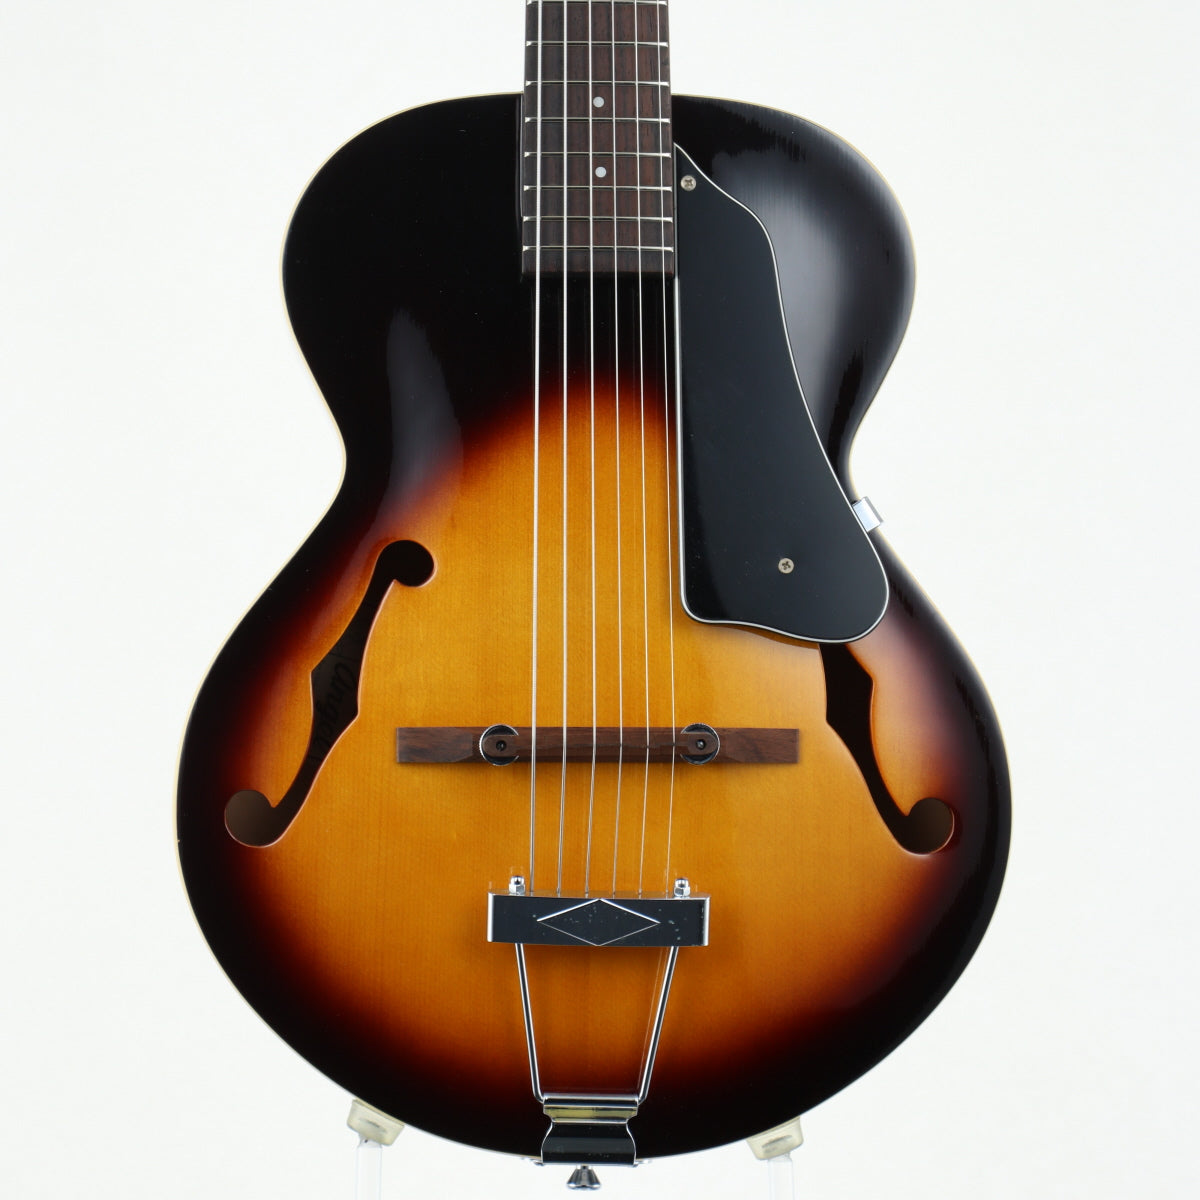 Archtop [Acoustic Guitar/Electric Guitar › Archtop]